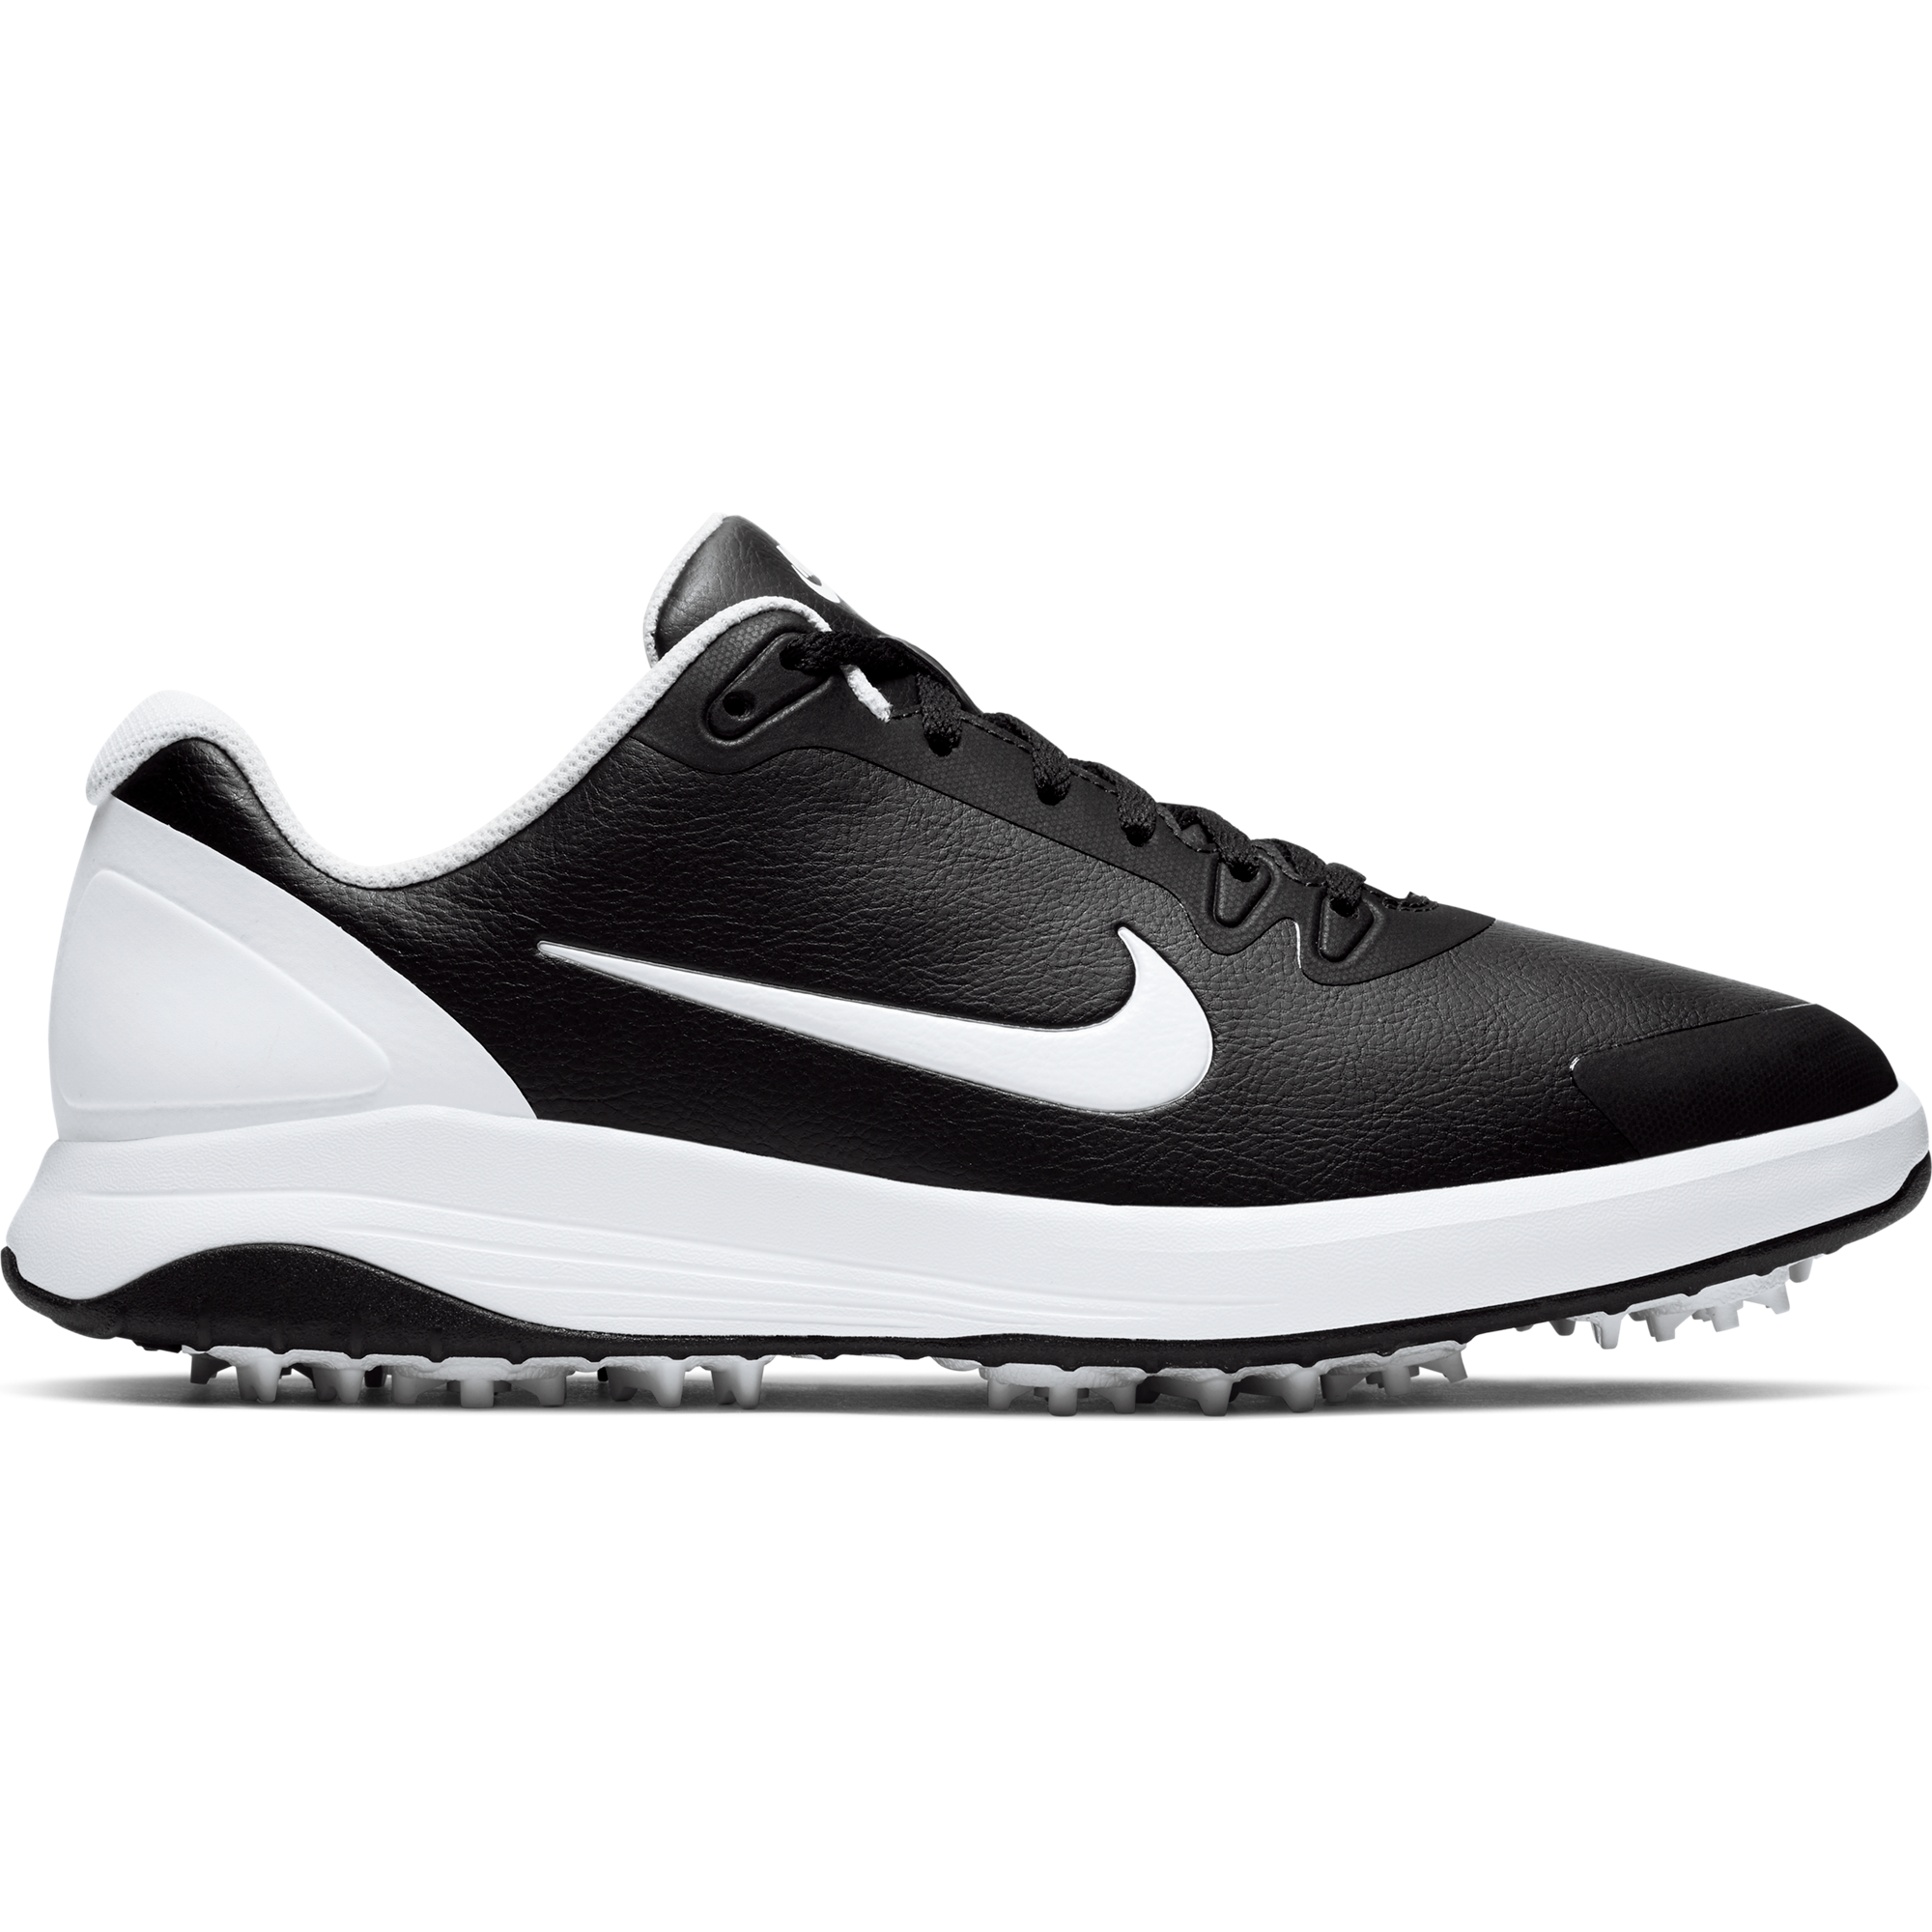 Infinity G Shoe Black/White | NIKE | Golf Town Limited